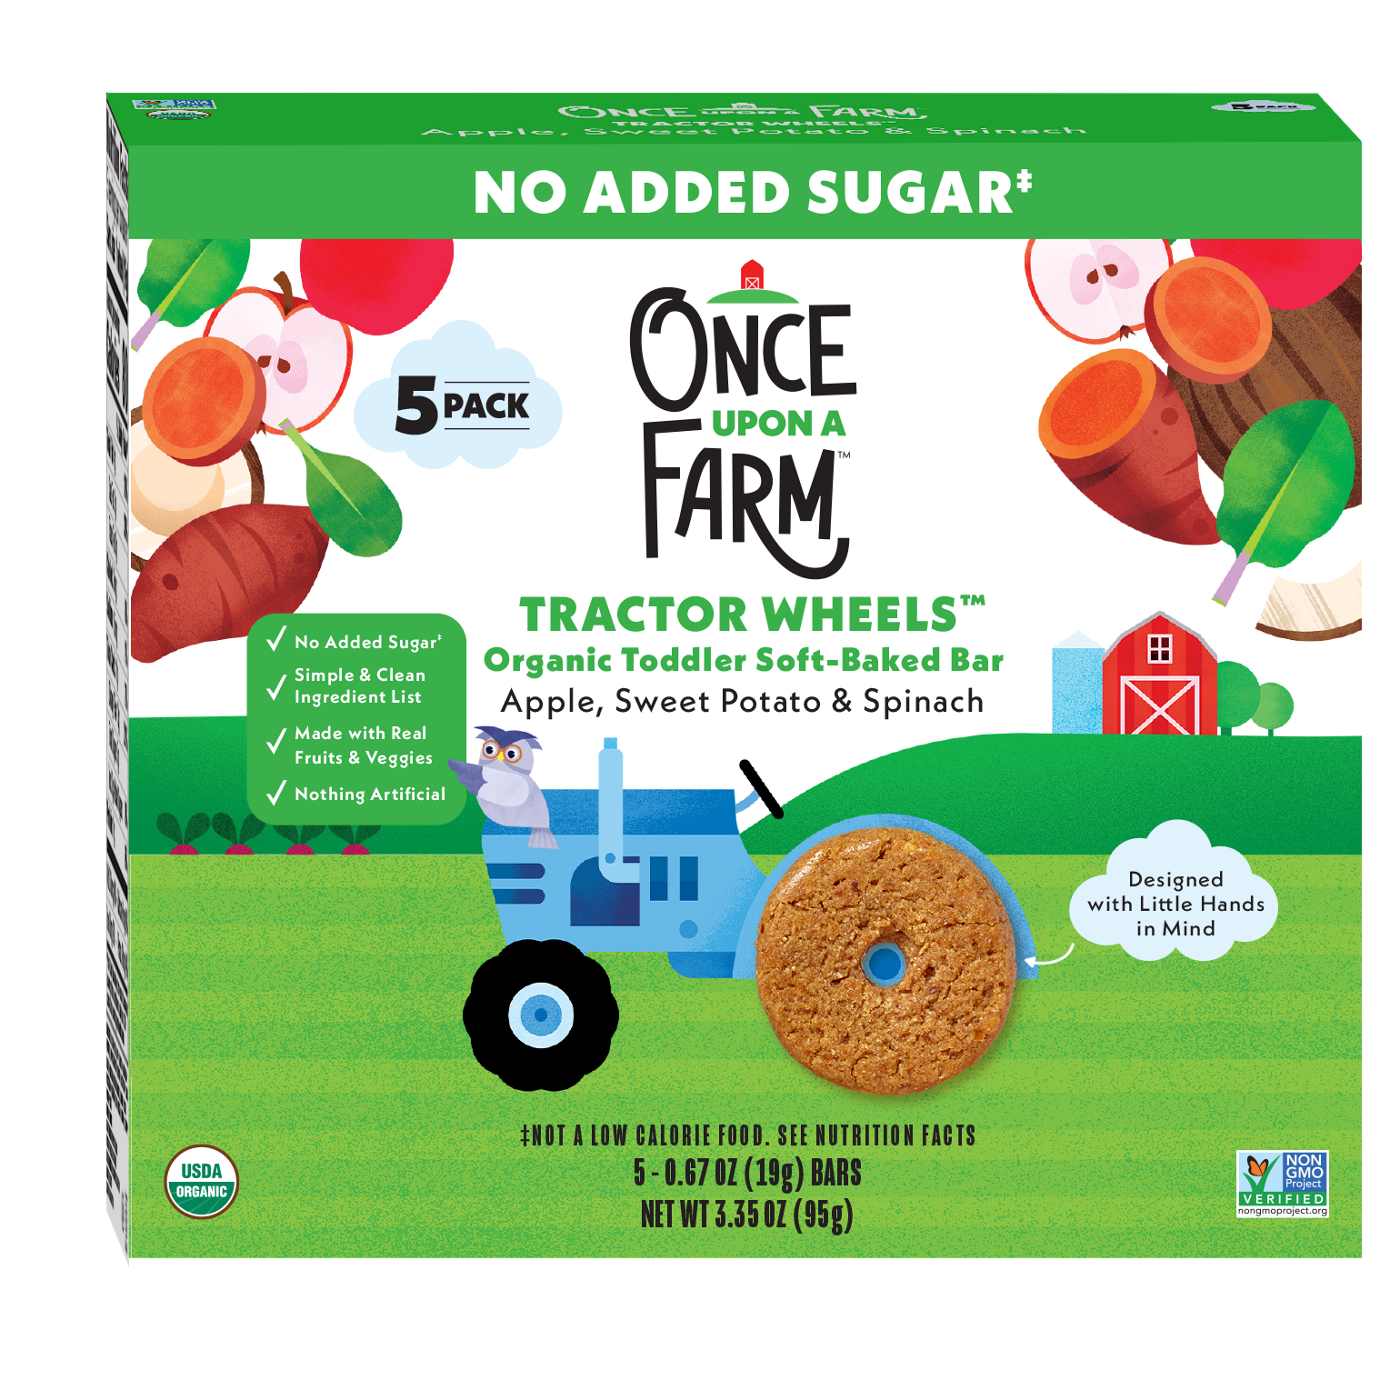 Once Upon a Farm Tractor Wheels Organic Toddler Soft-Baked Bar - Apple, Sweet Potato & Spinach; image 1 of 2